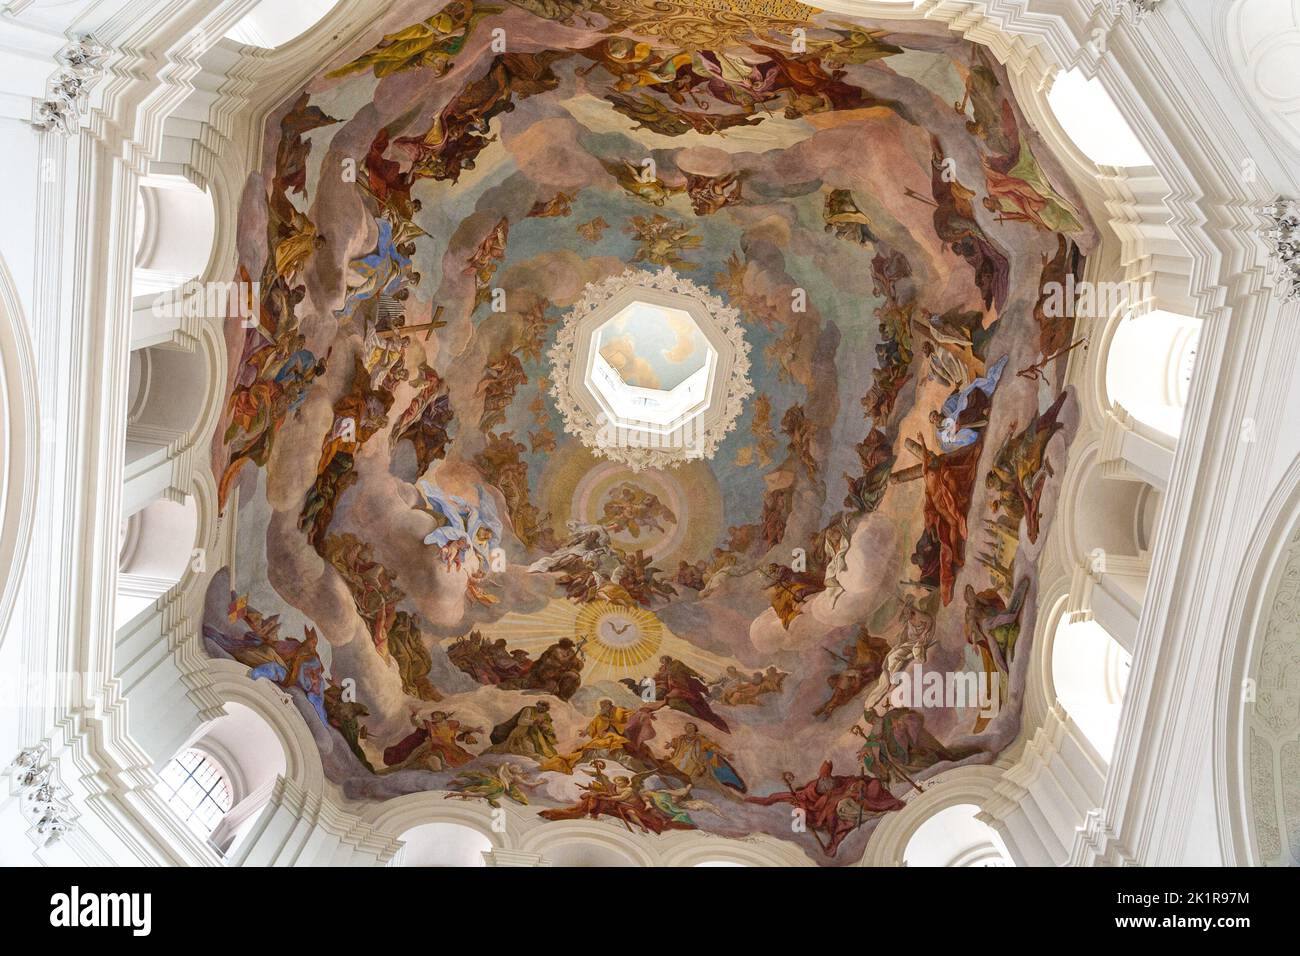 Beautiful close-up view of the large dome fresco in the cupola of the western octagon of the famous Neumünster Collegiate church in Würzburg, Germany. Stock Photo